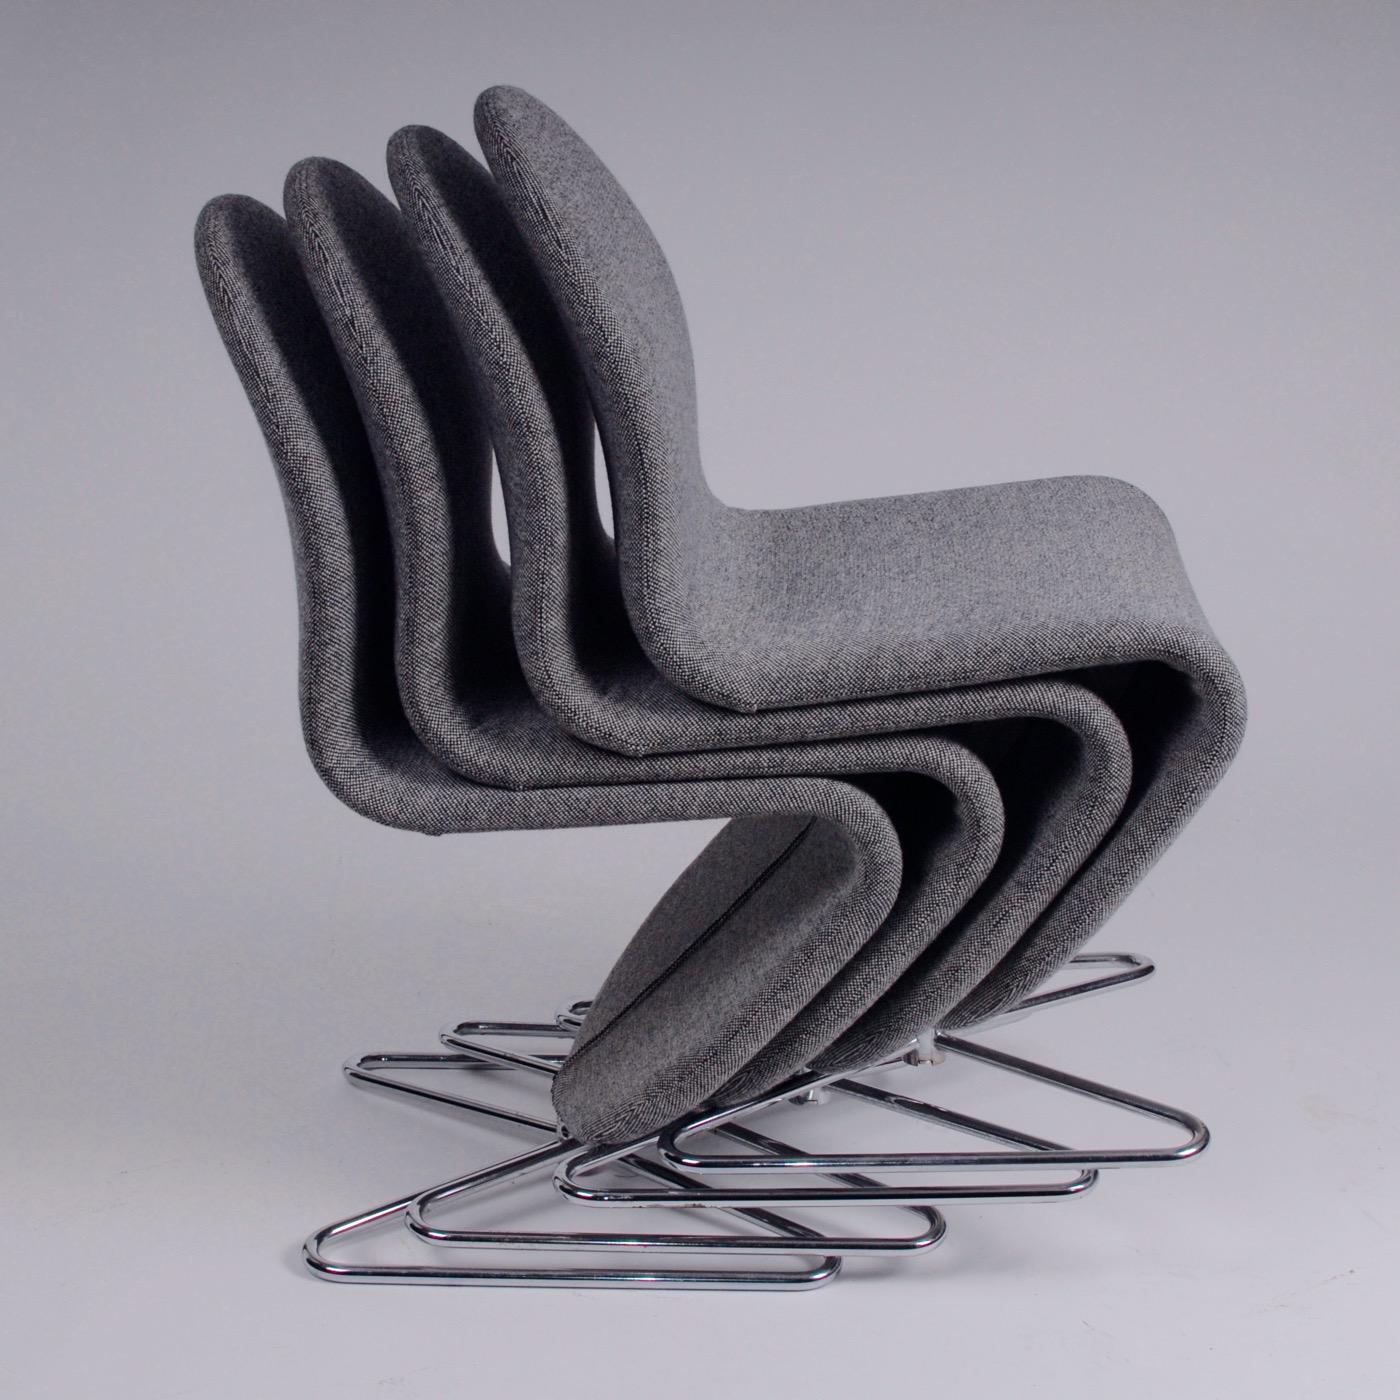 Plated Space Age Verner Panton Set of Four Chairs 123 Serie Fritz Hansen Wool Fabric